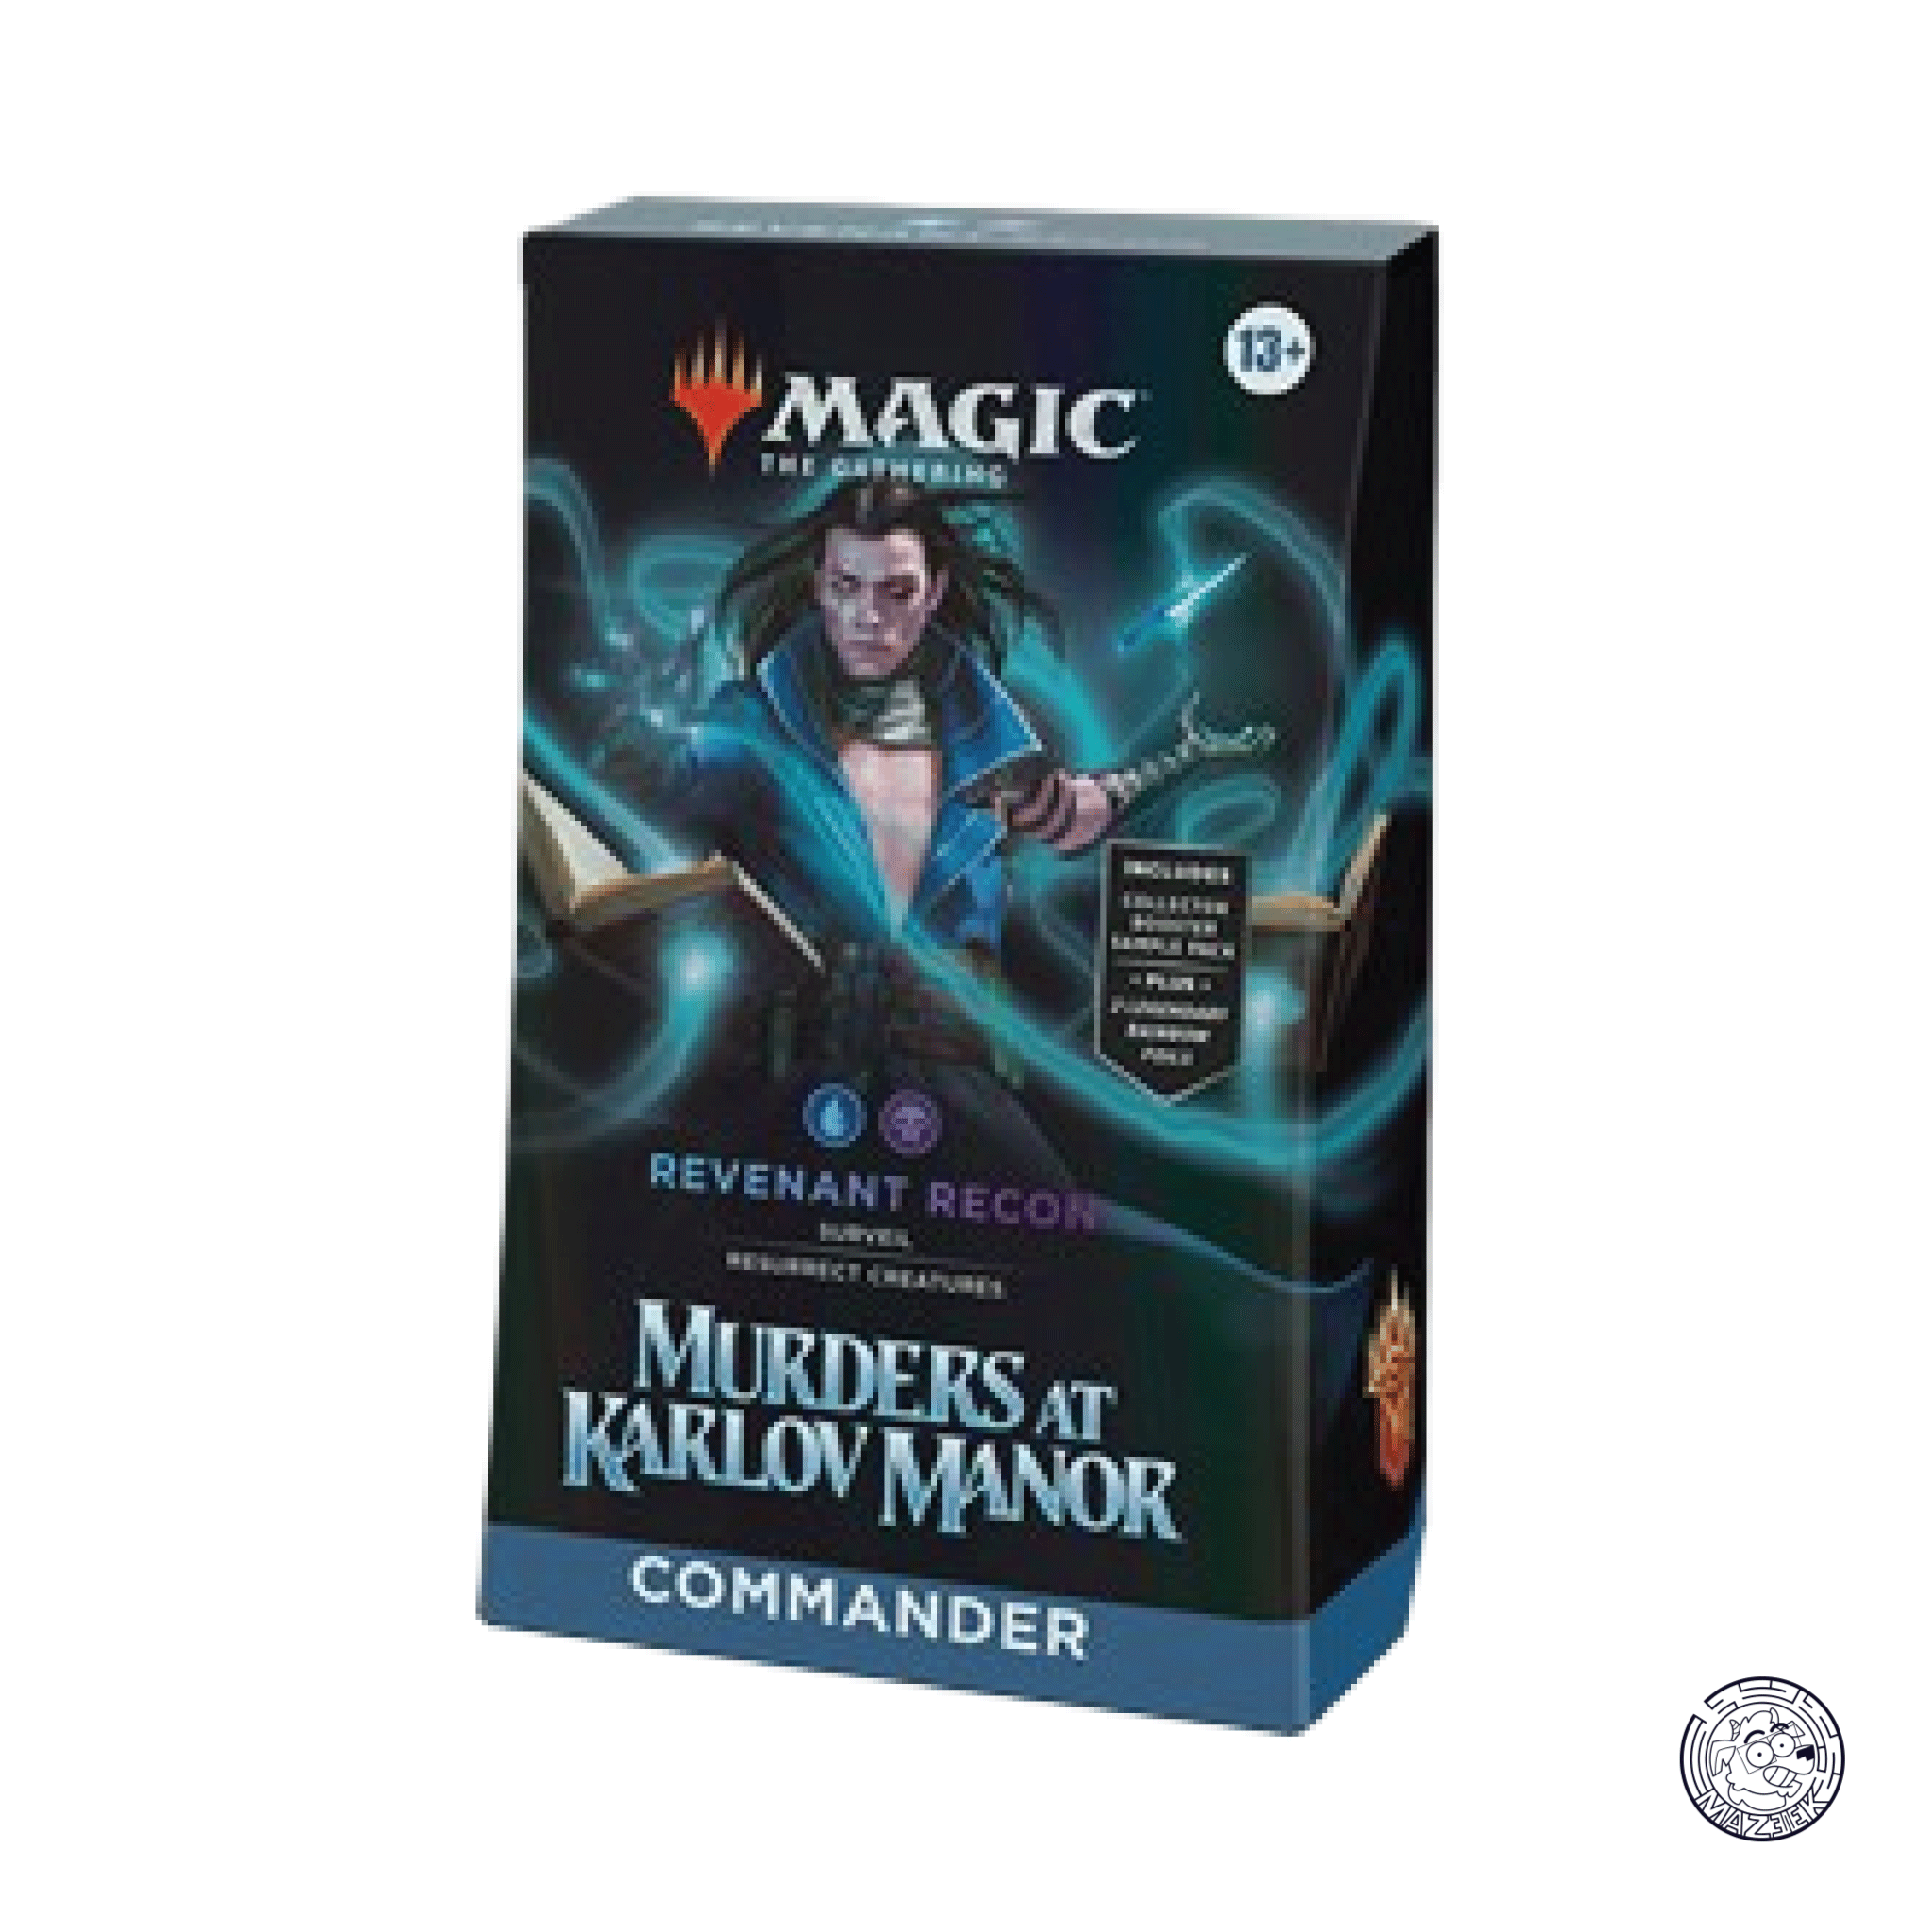 Magic the Gathering - Commander Deck: Murders at Karlov Manor "Revenant Recon" ENG